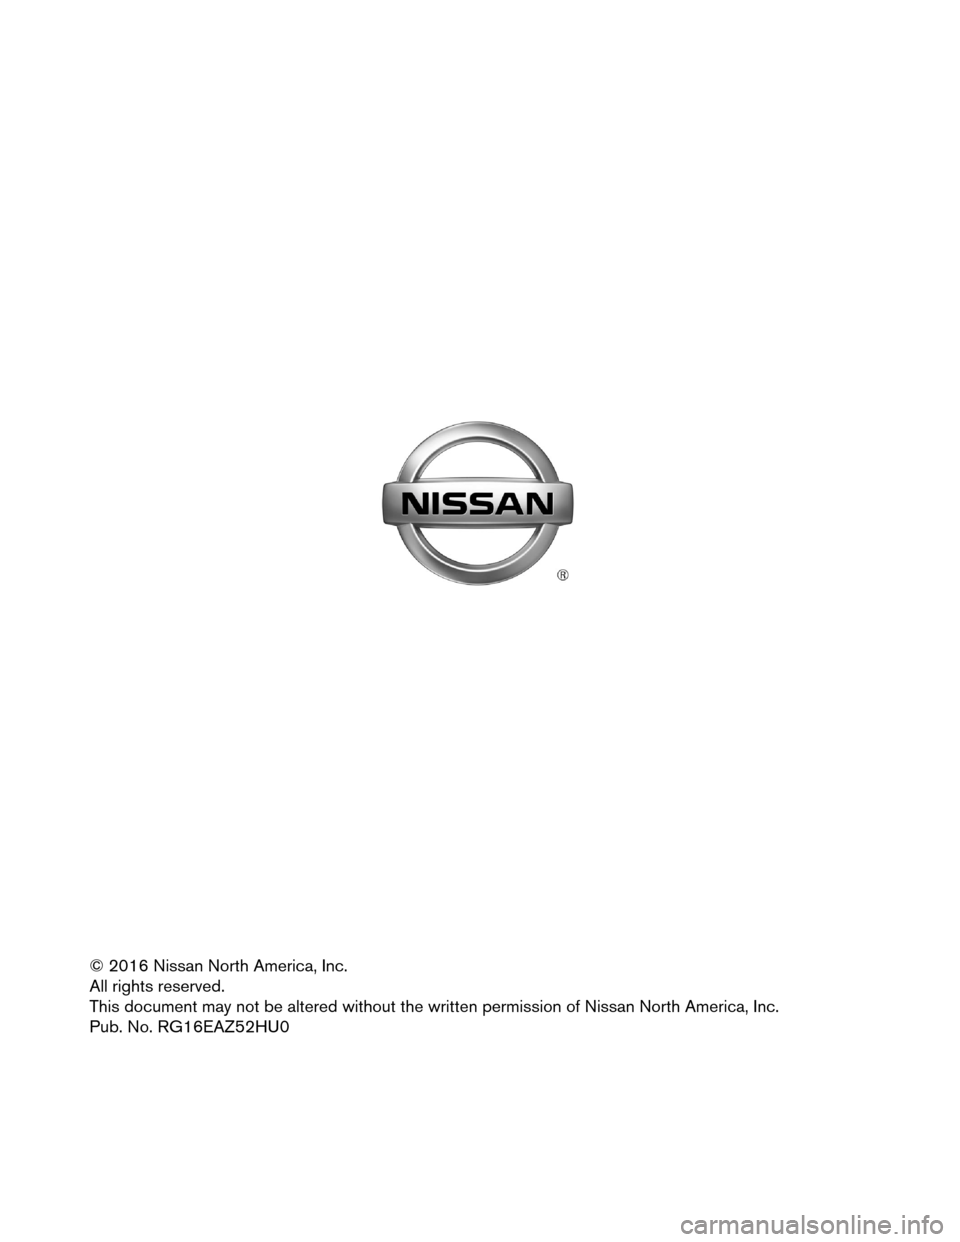 NISSAN MURANO HYBRID 2016 3.G Roadside Assistance Guide © 2016 Nissan North America, Inc.
All
rights reserved.
This document may not be altered without the written permission of Nissan North America, Inc.
Pub. No. RG16EAZ52HU0  